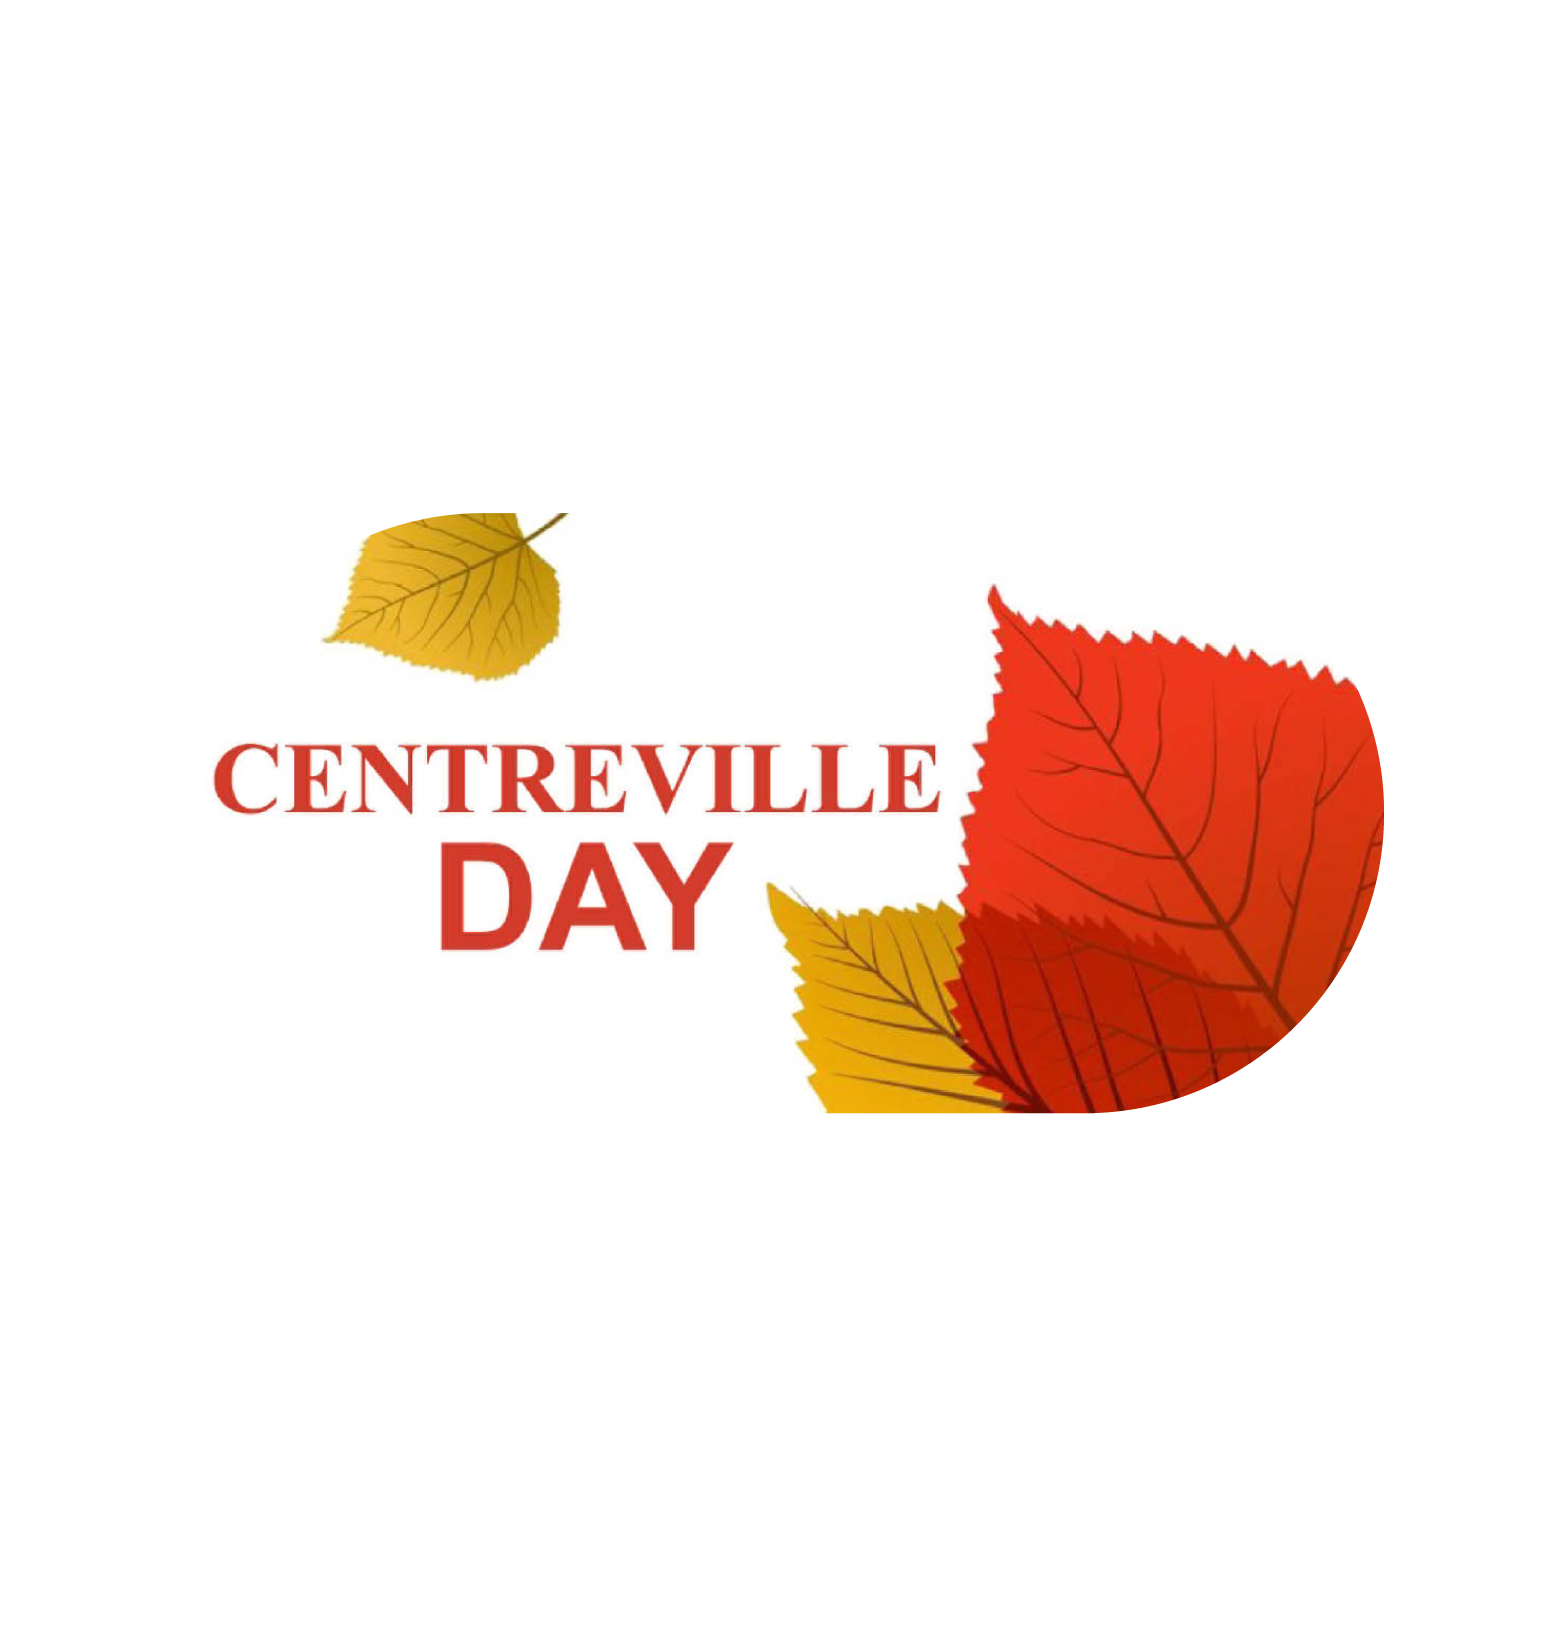 Centreville Day